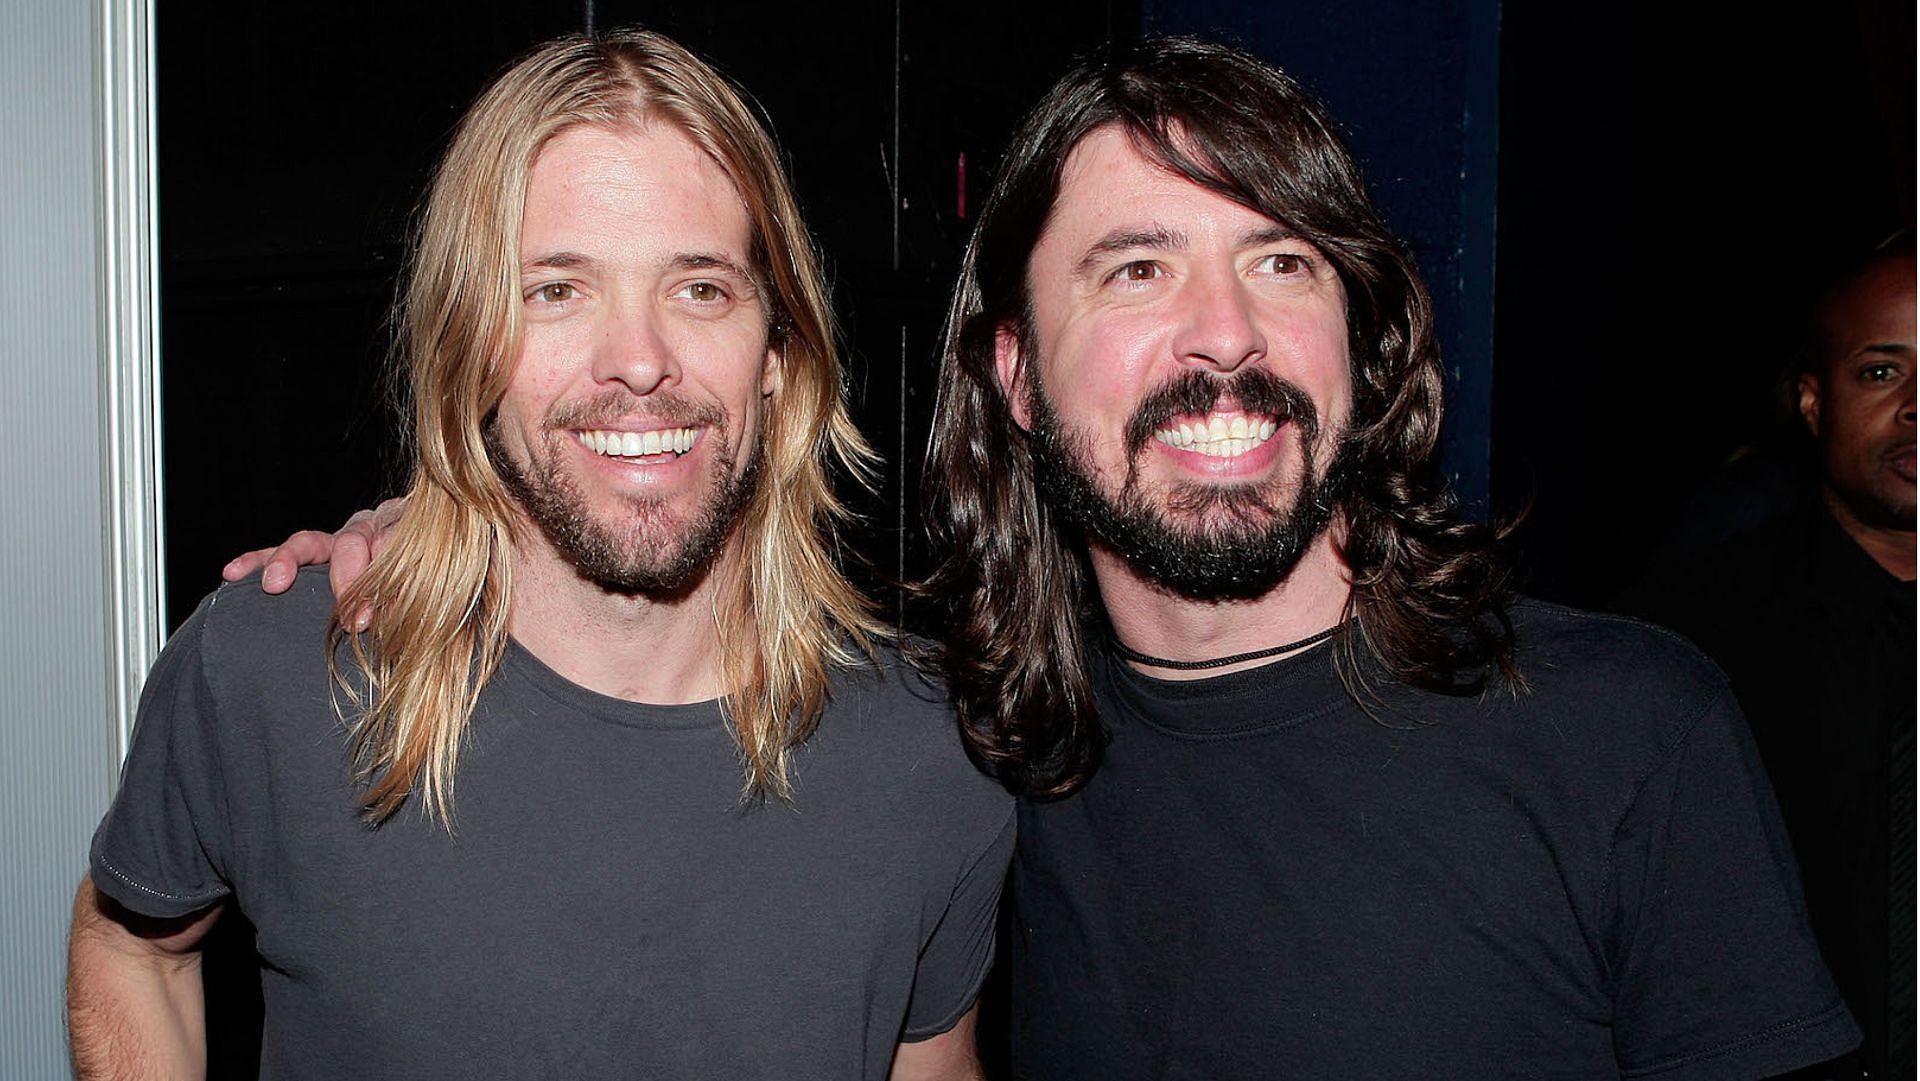 "Our bandmate, our brother": Dave Grohl delivers emotional speech...